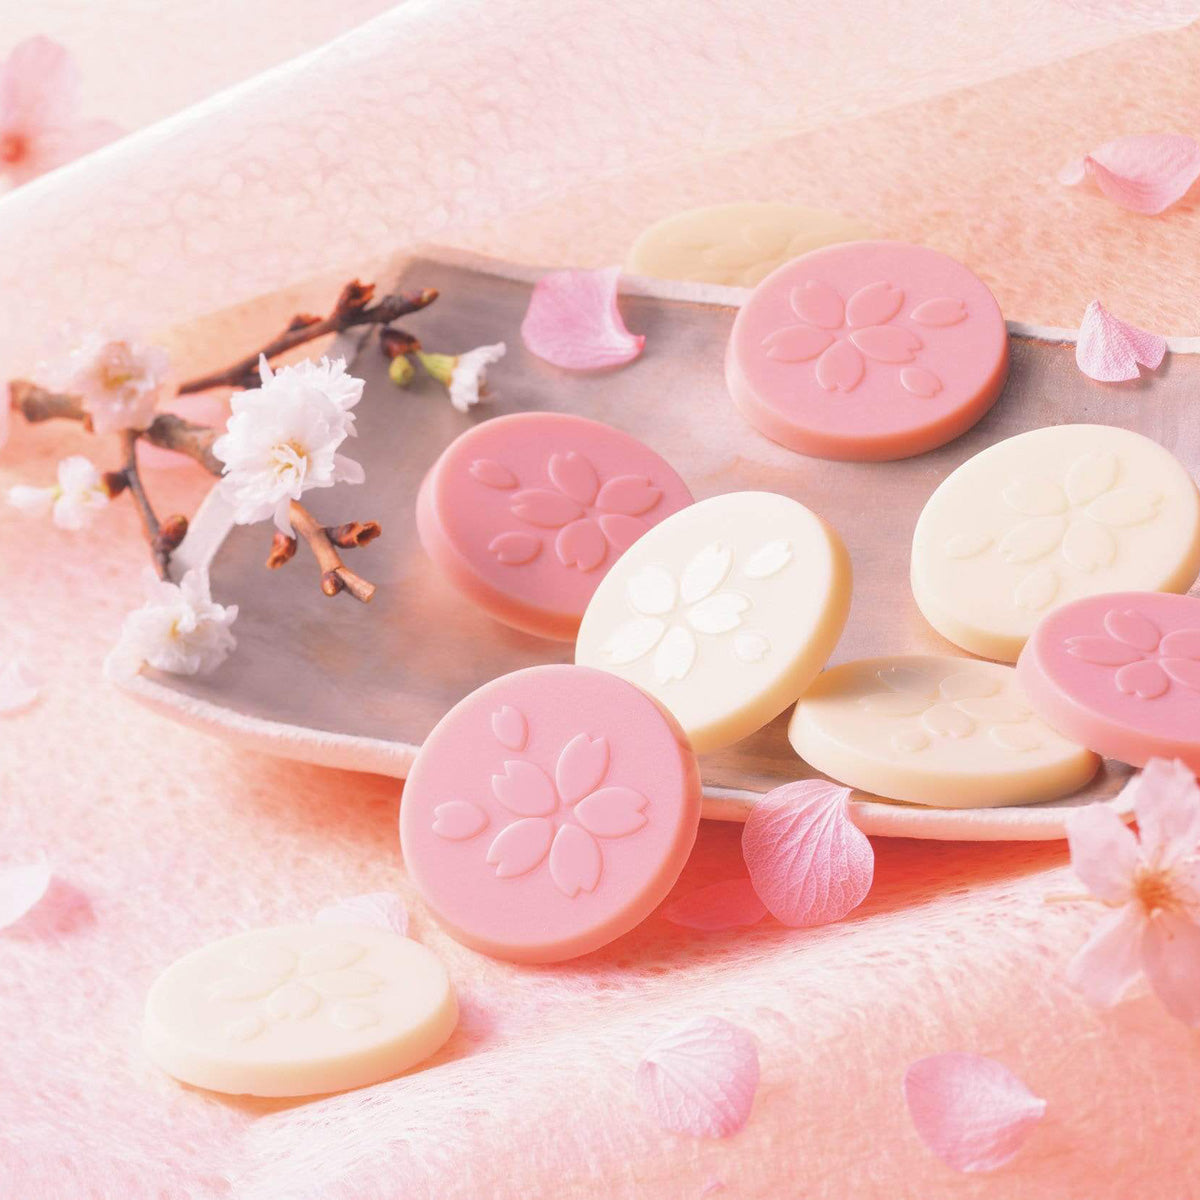 ROYCE' Chocolate - Sakuraberry & Sakurawhite Chocolate - Image shows pink and white chocolate discs with floral engravings. Accents include a gray plate, white flowers, pink petals, and brown twigs. Background is in pink color.